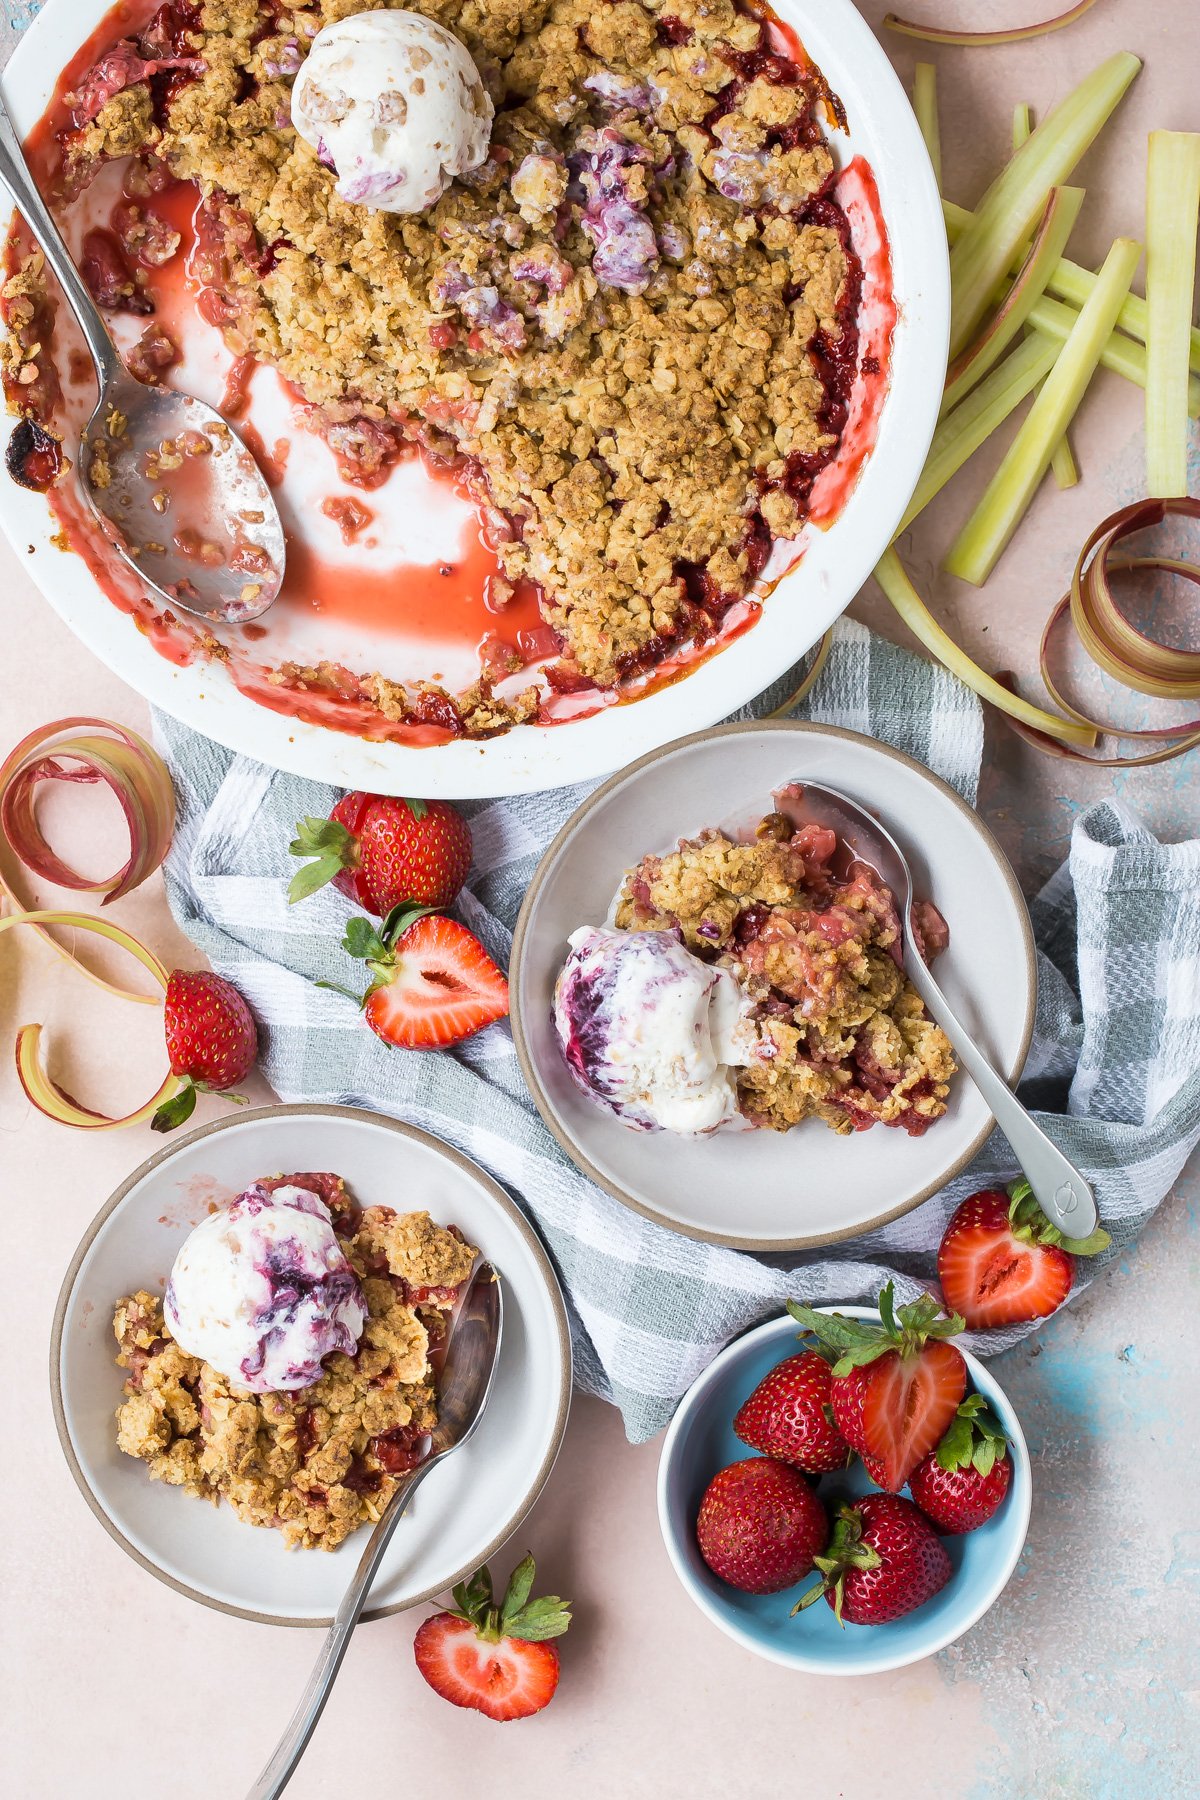 Strawberry rhubarb crumble in pie dish with two servings in bowls topped with ice cream.